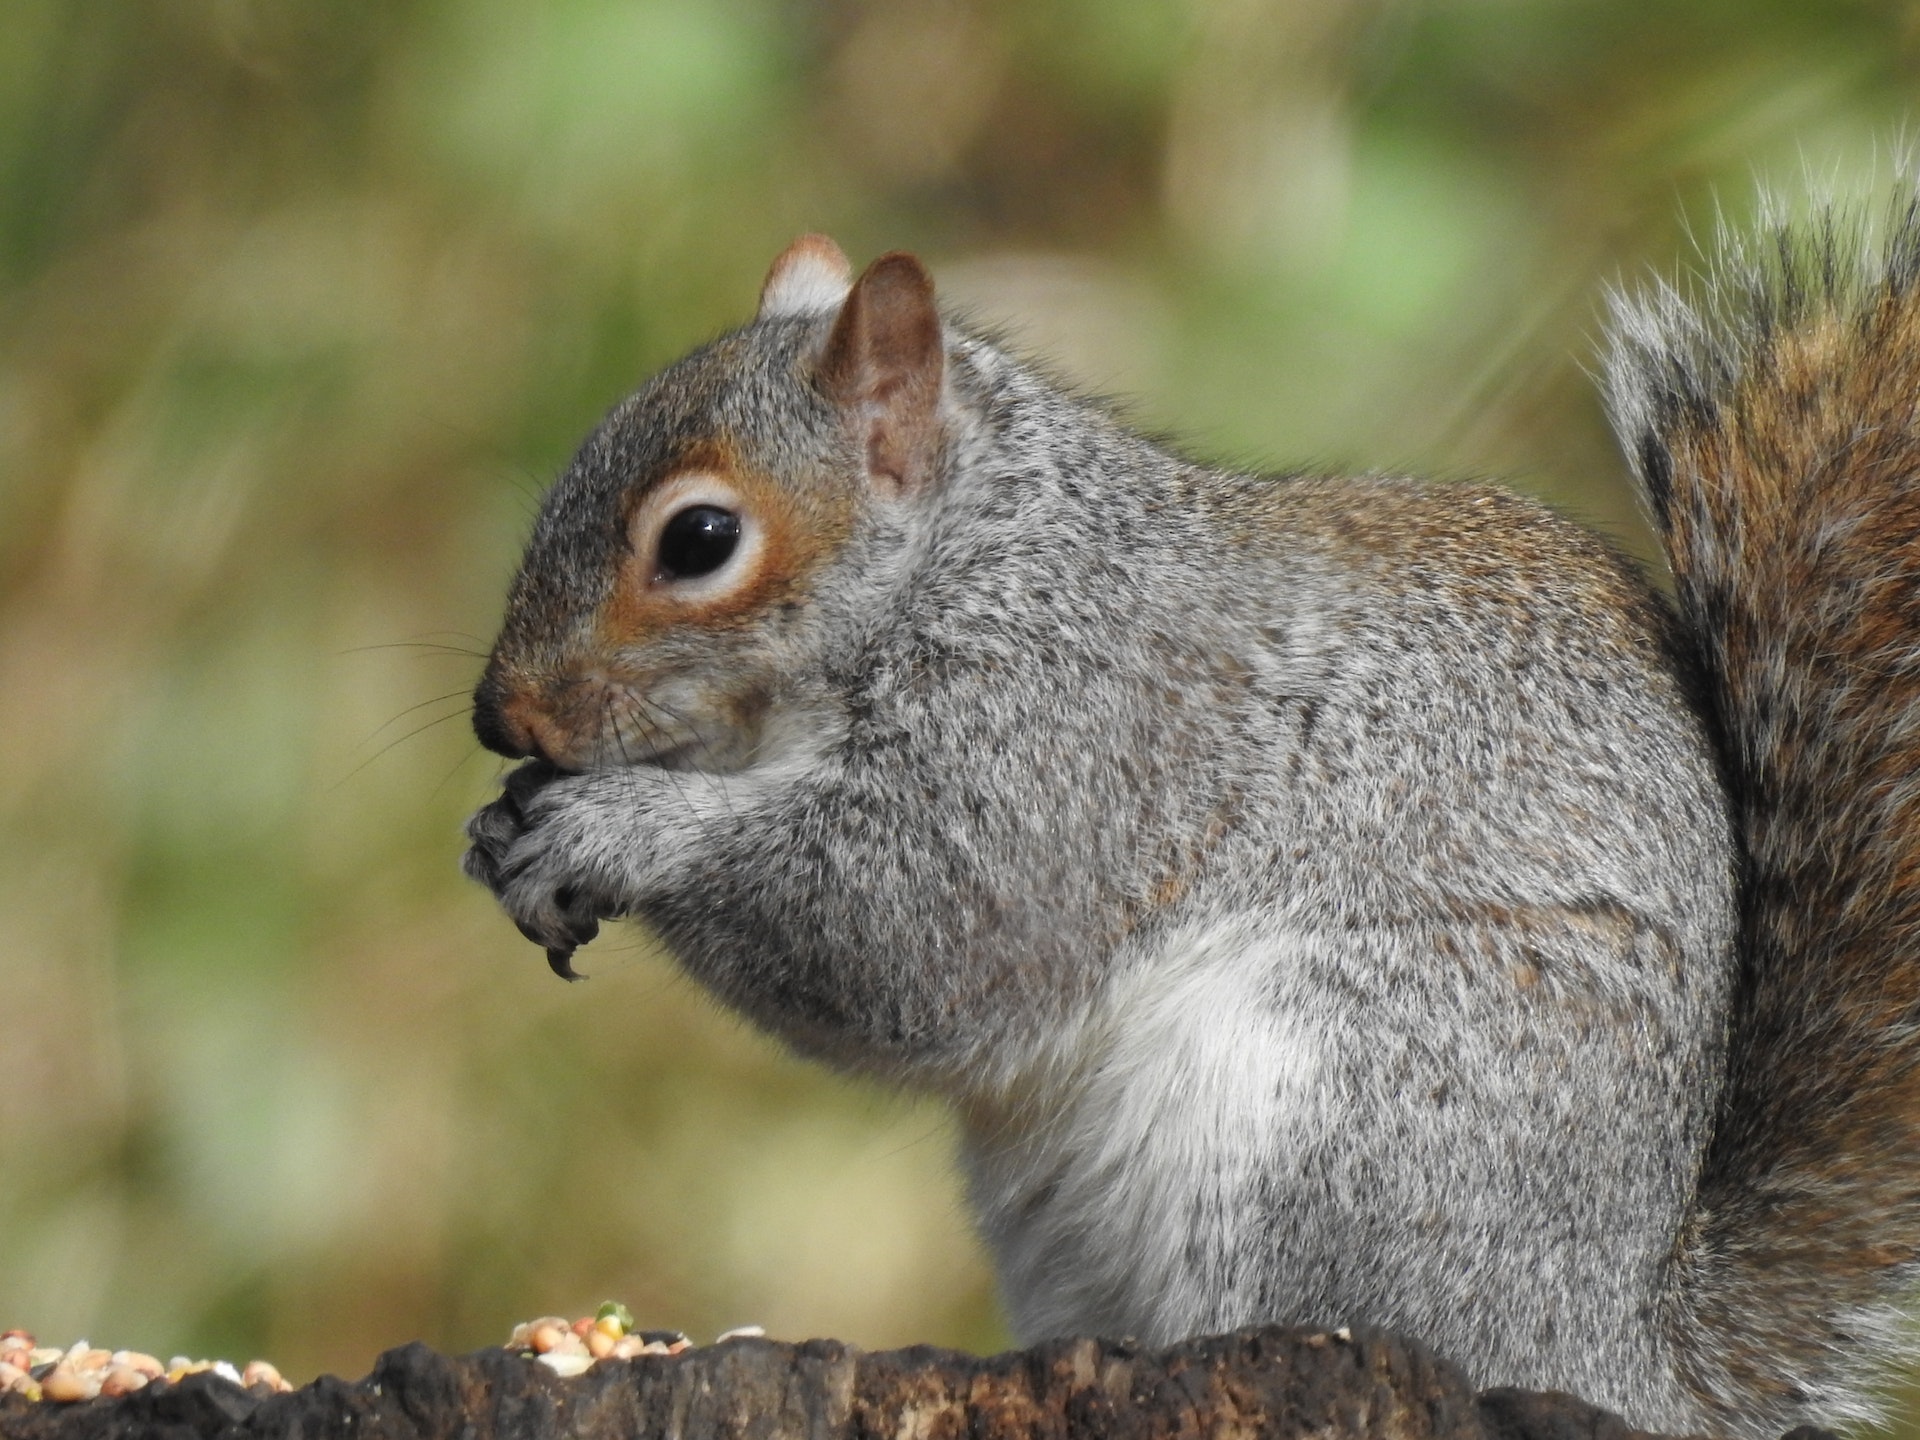 10 Surprising and Little-Known Facts About Squirrels